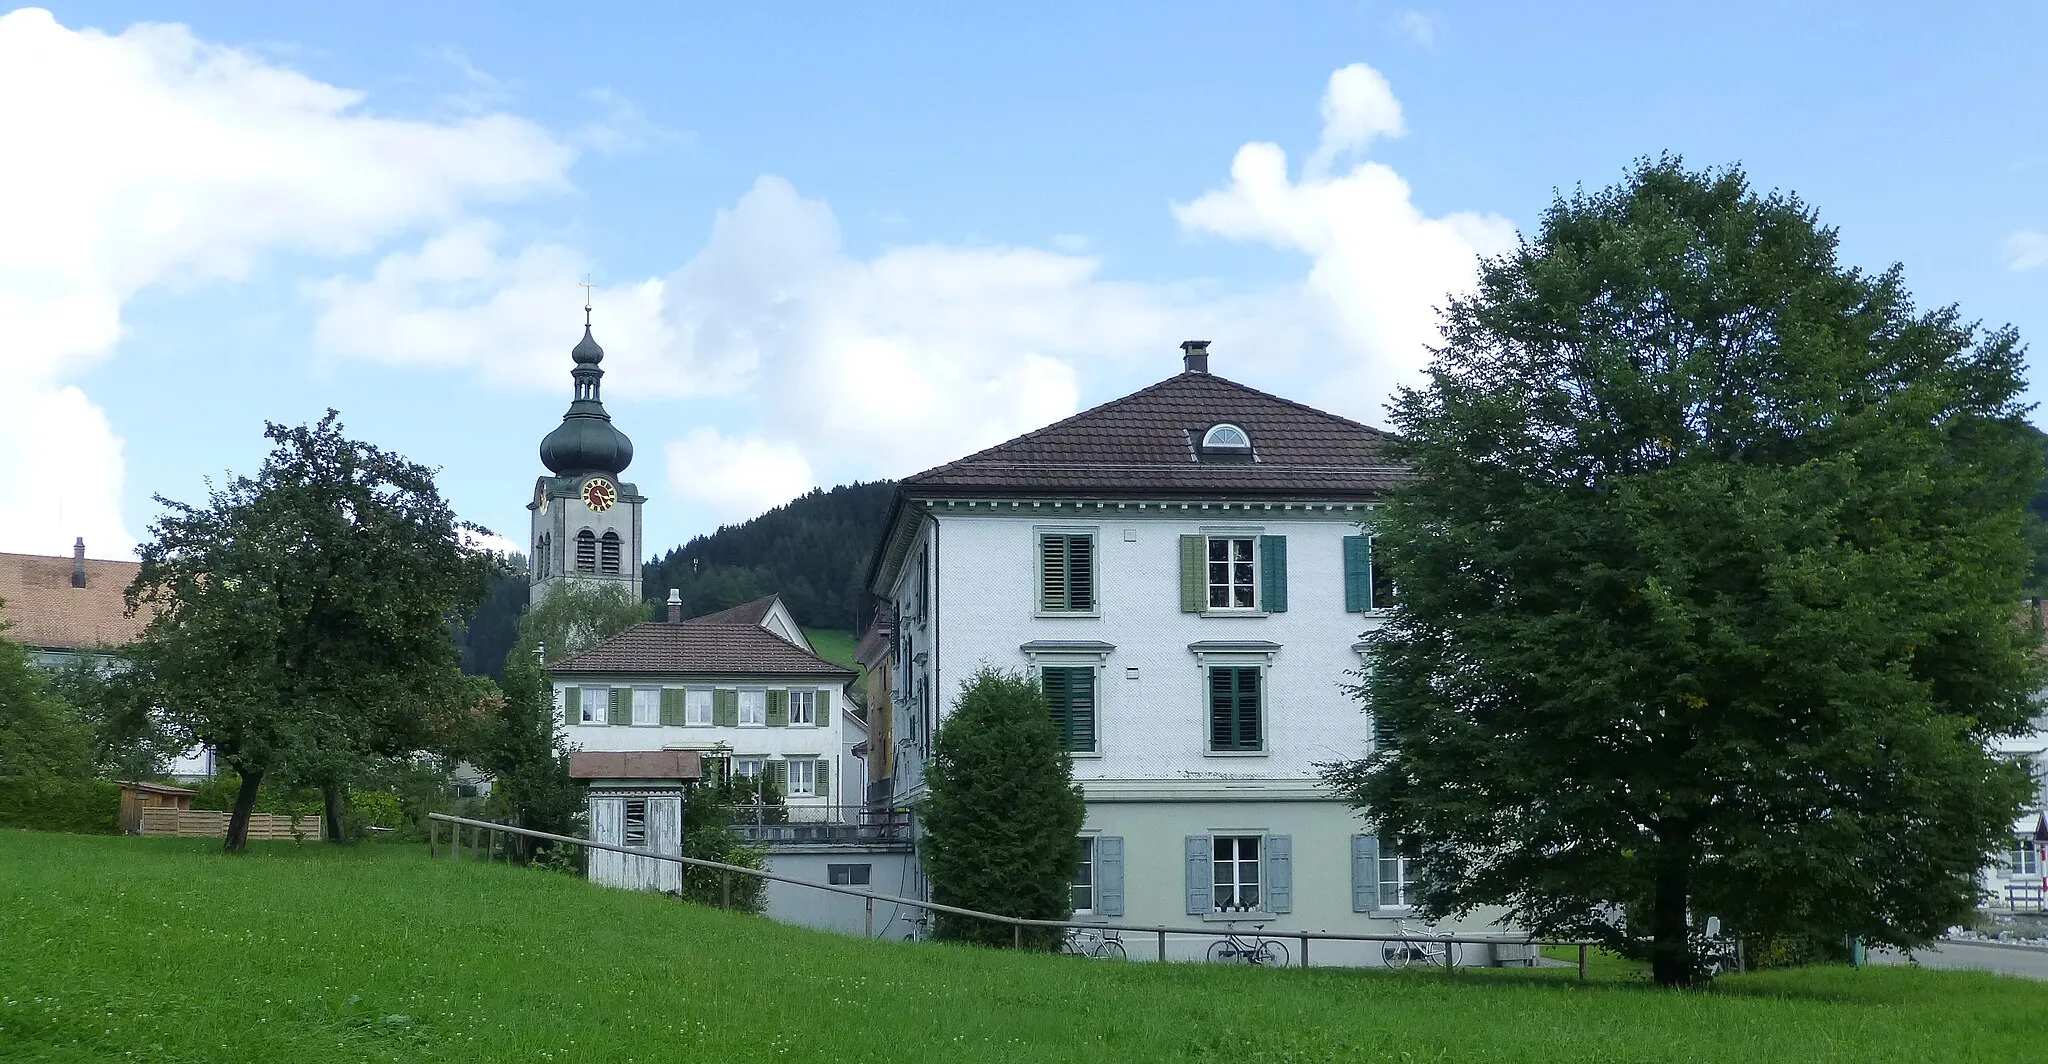 Photo showing: Large house and oinion tower church in Bühler AR, Switzerland.